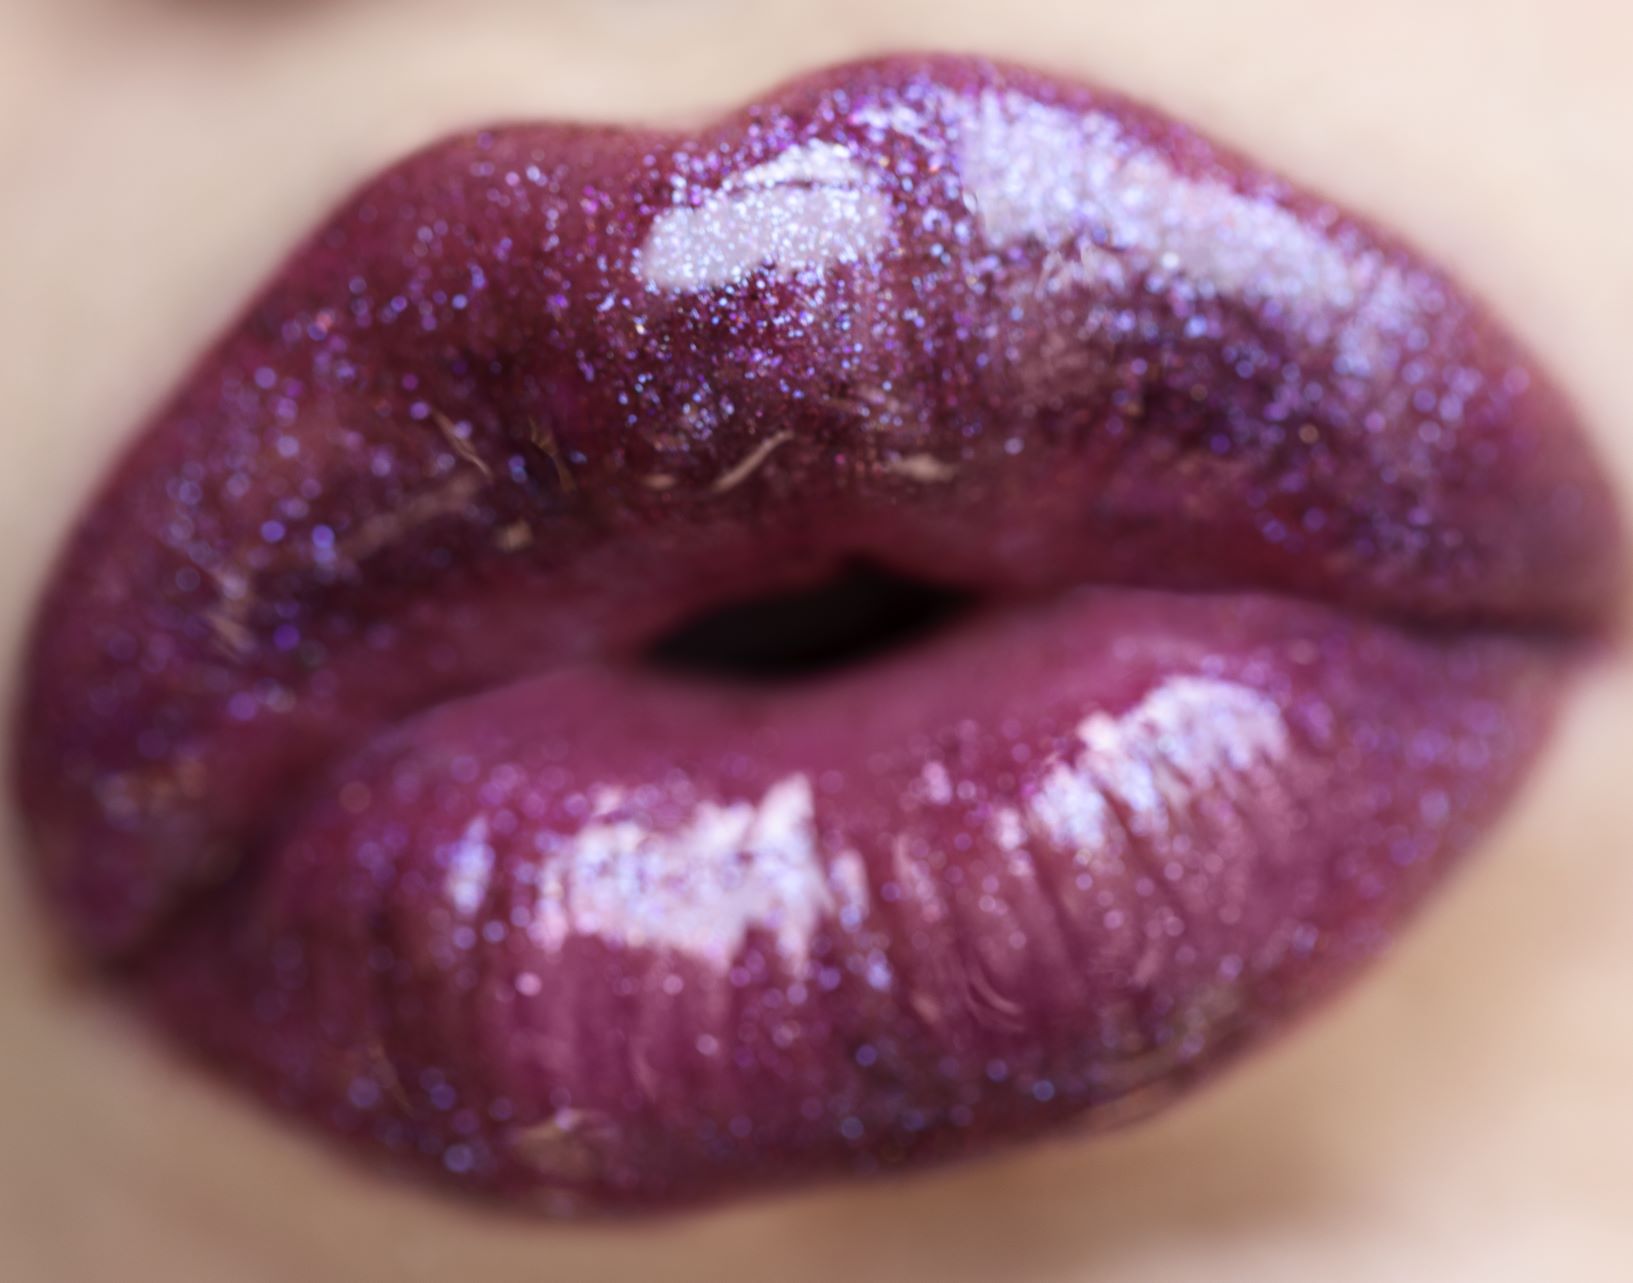 Close-up of a woman's mouth making a kiss shape and wearing glossy lipstick